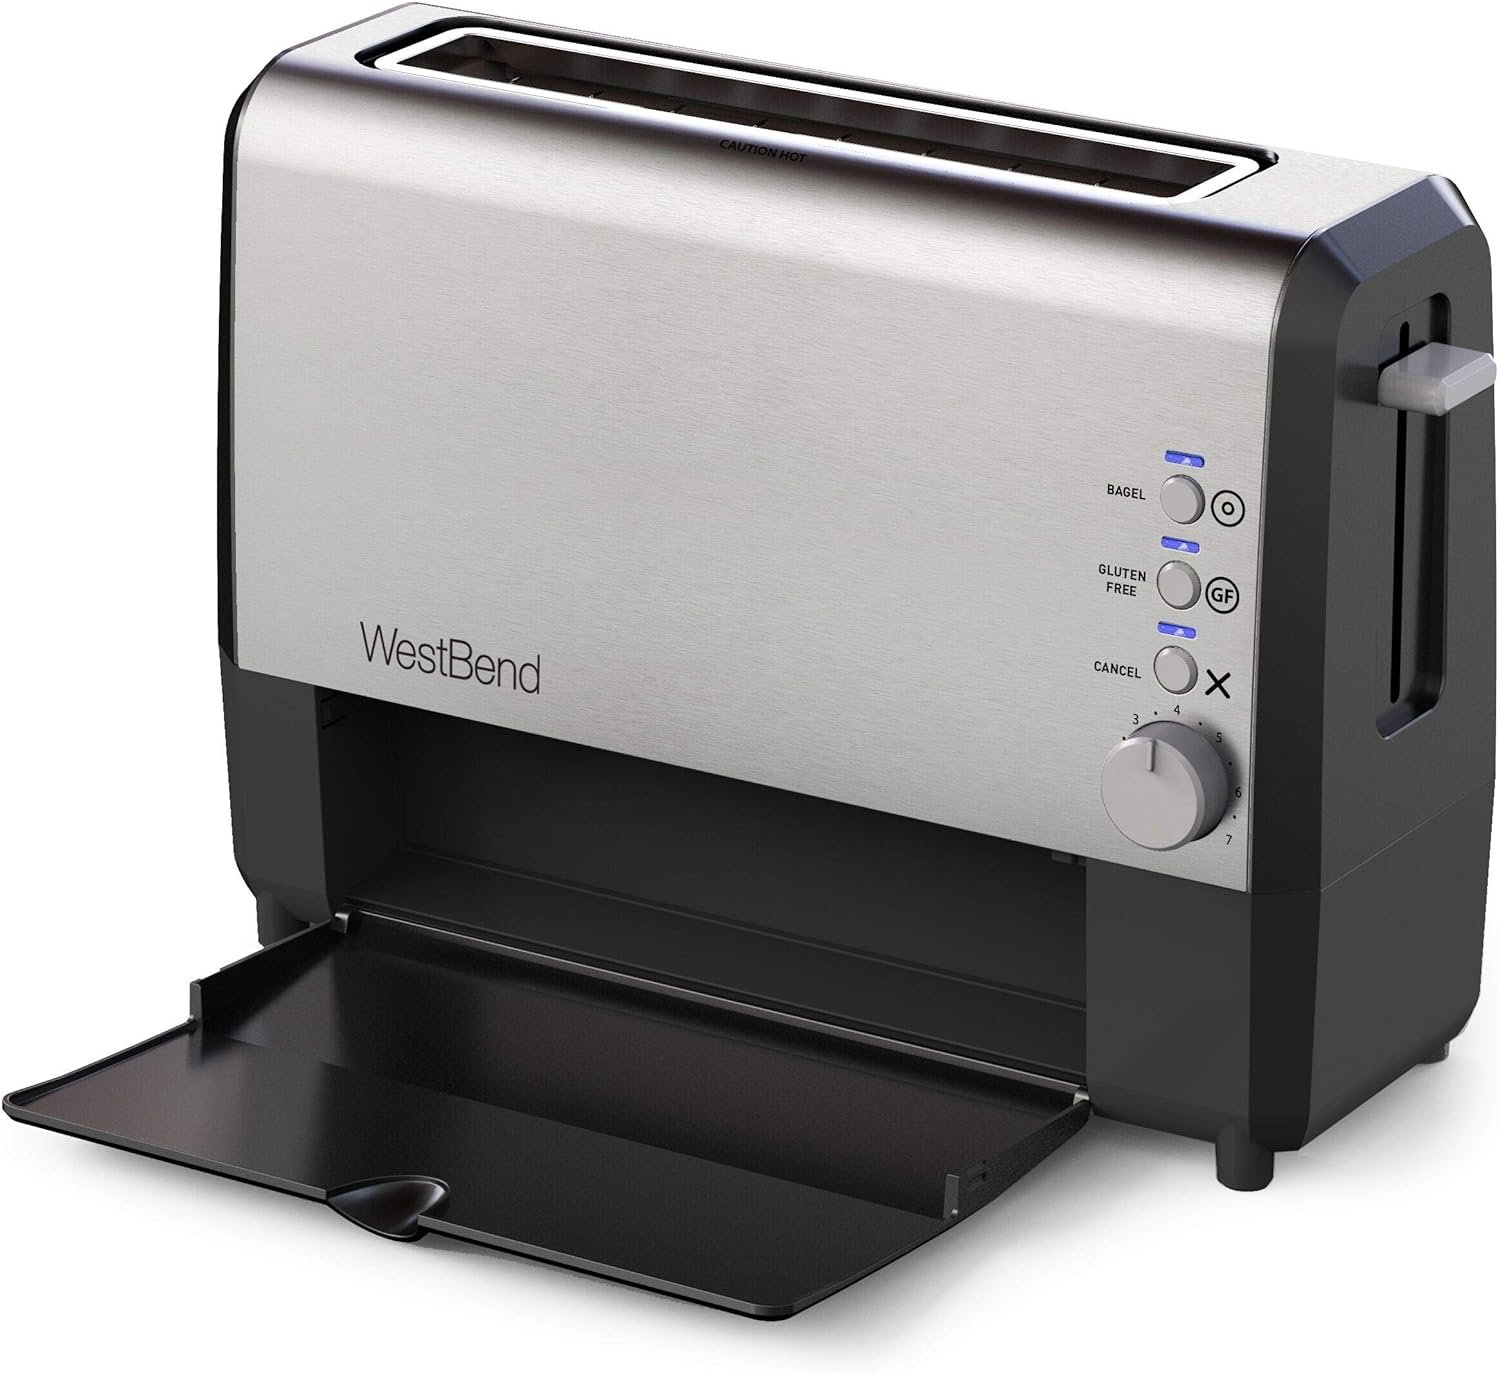 West Bend 77224 Toaster Review